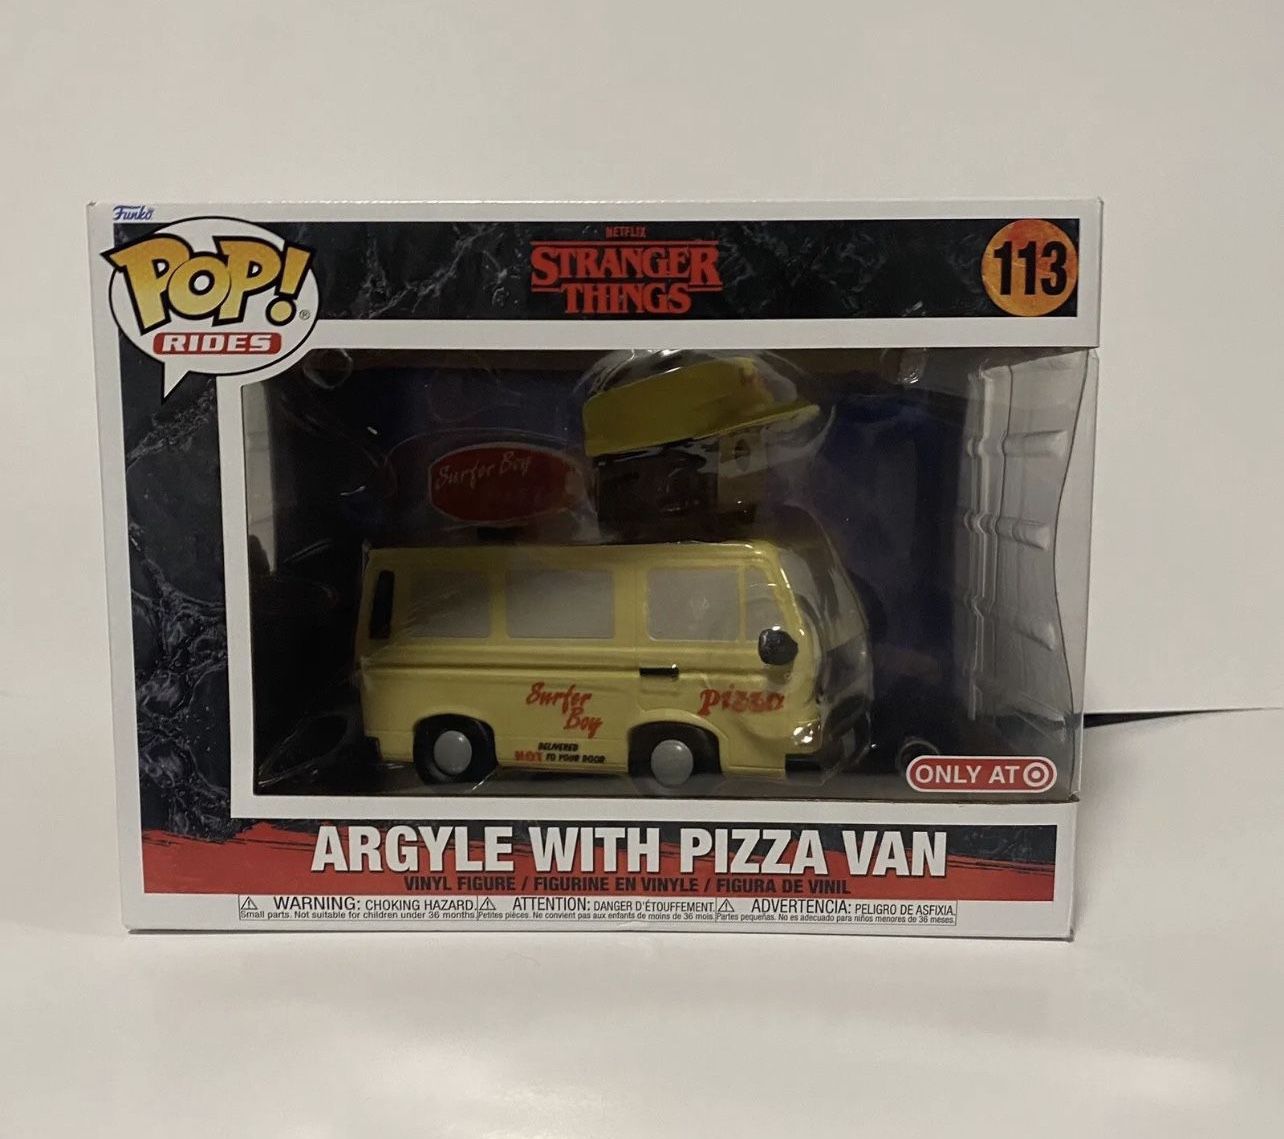 Funko Pop! Rides Stranger Things Argyle With Pizza Van Target Exclusive